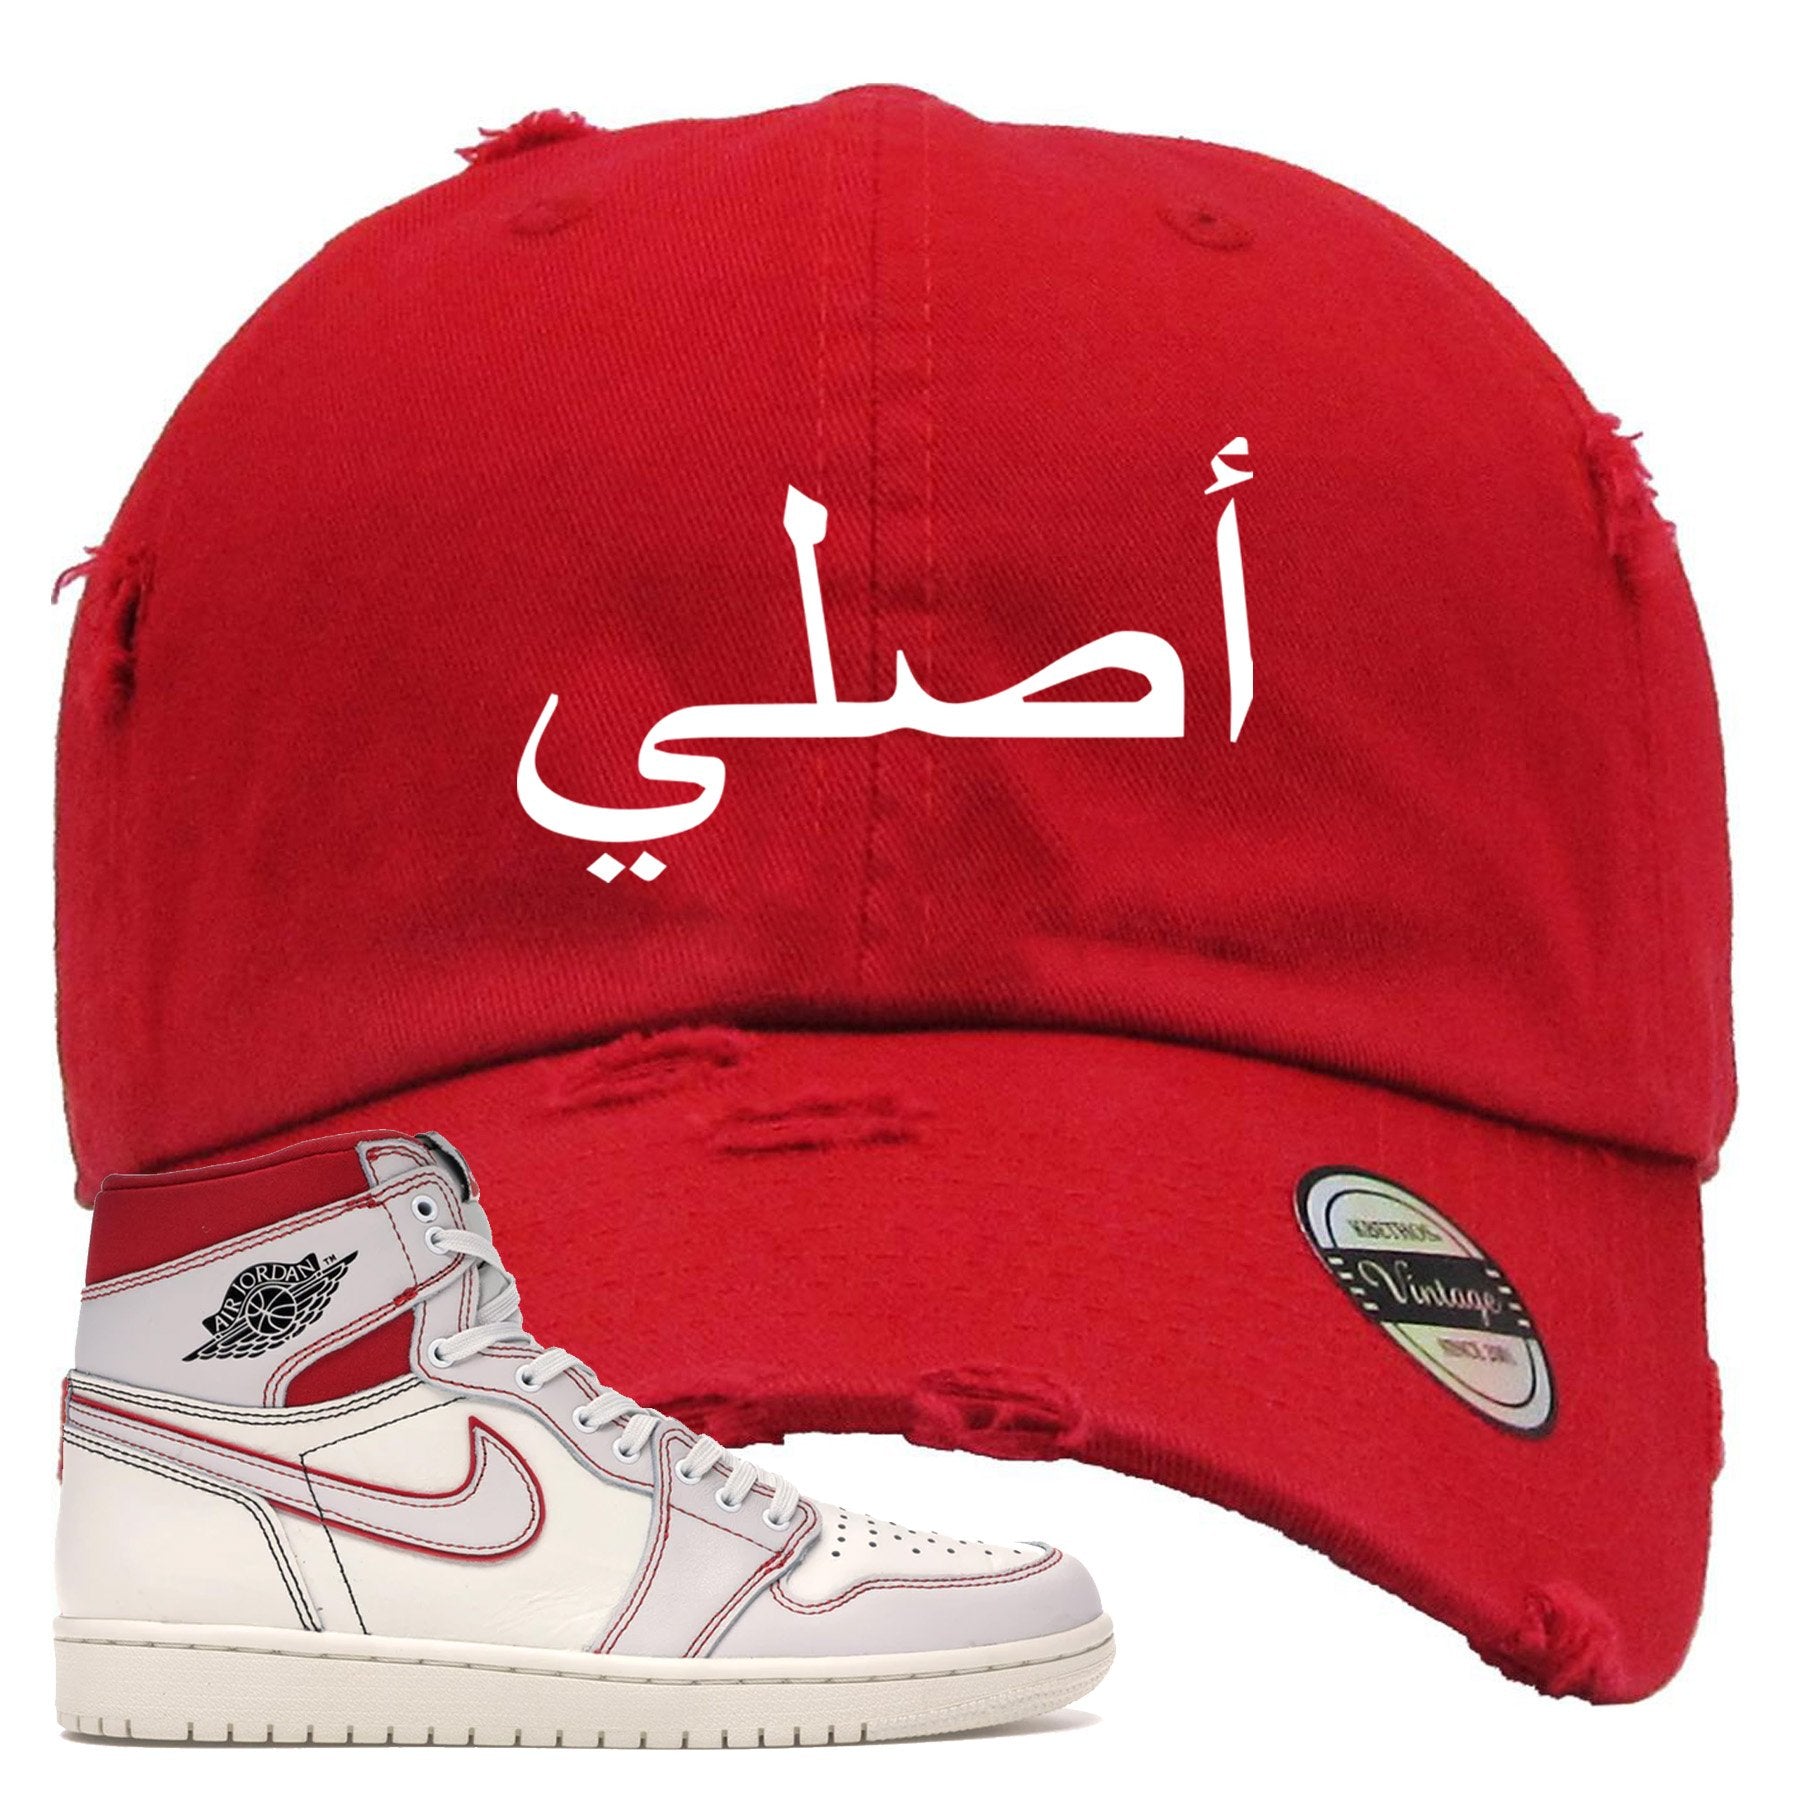 Red and white hat to match the white and red Jordan 1 shoes